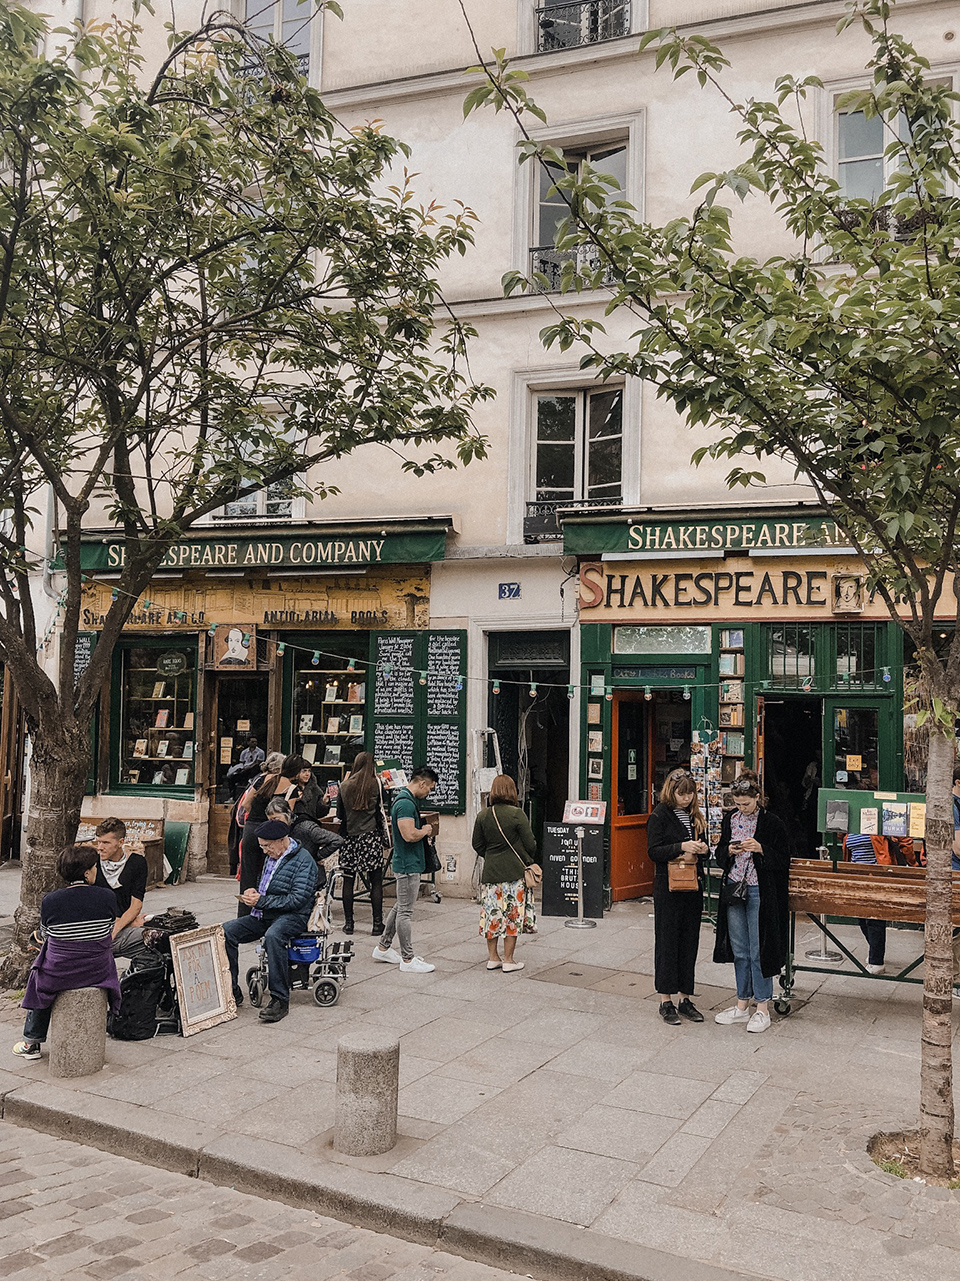 The outside of the Shakespeare and Company bookshop in Paris